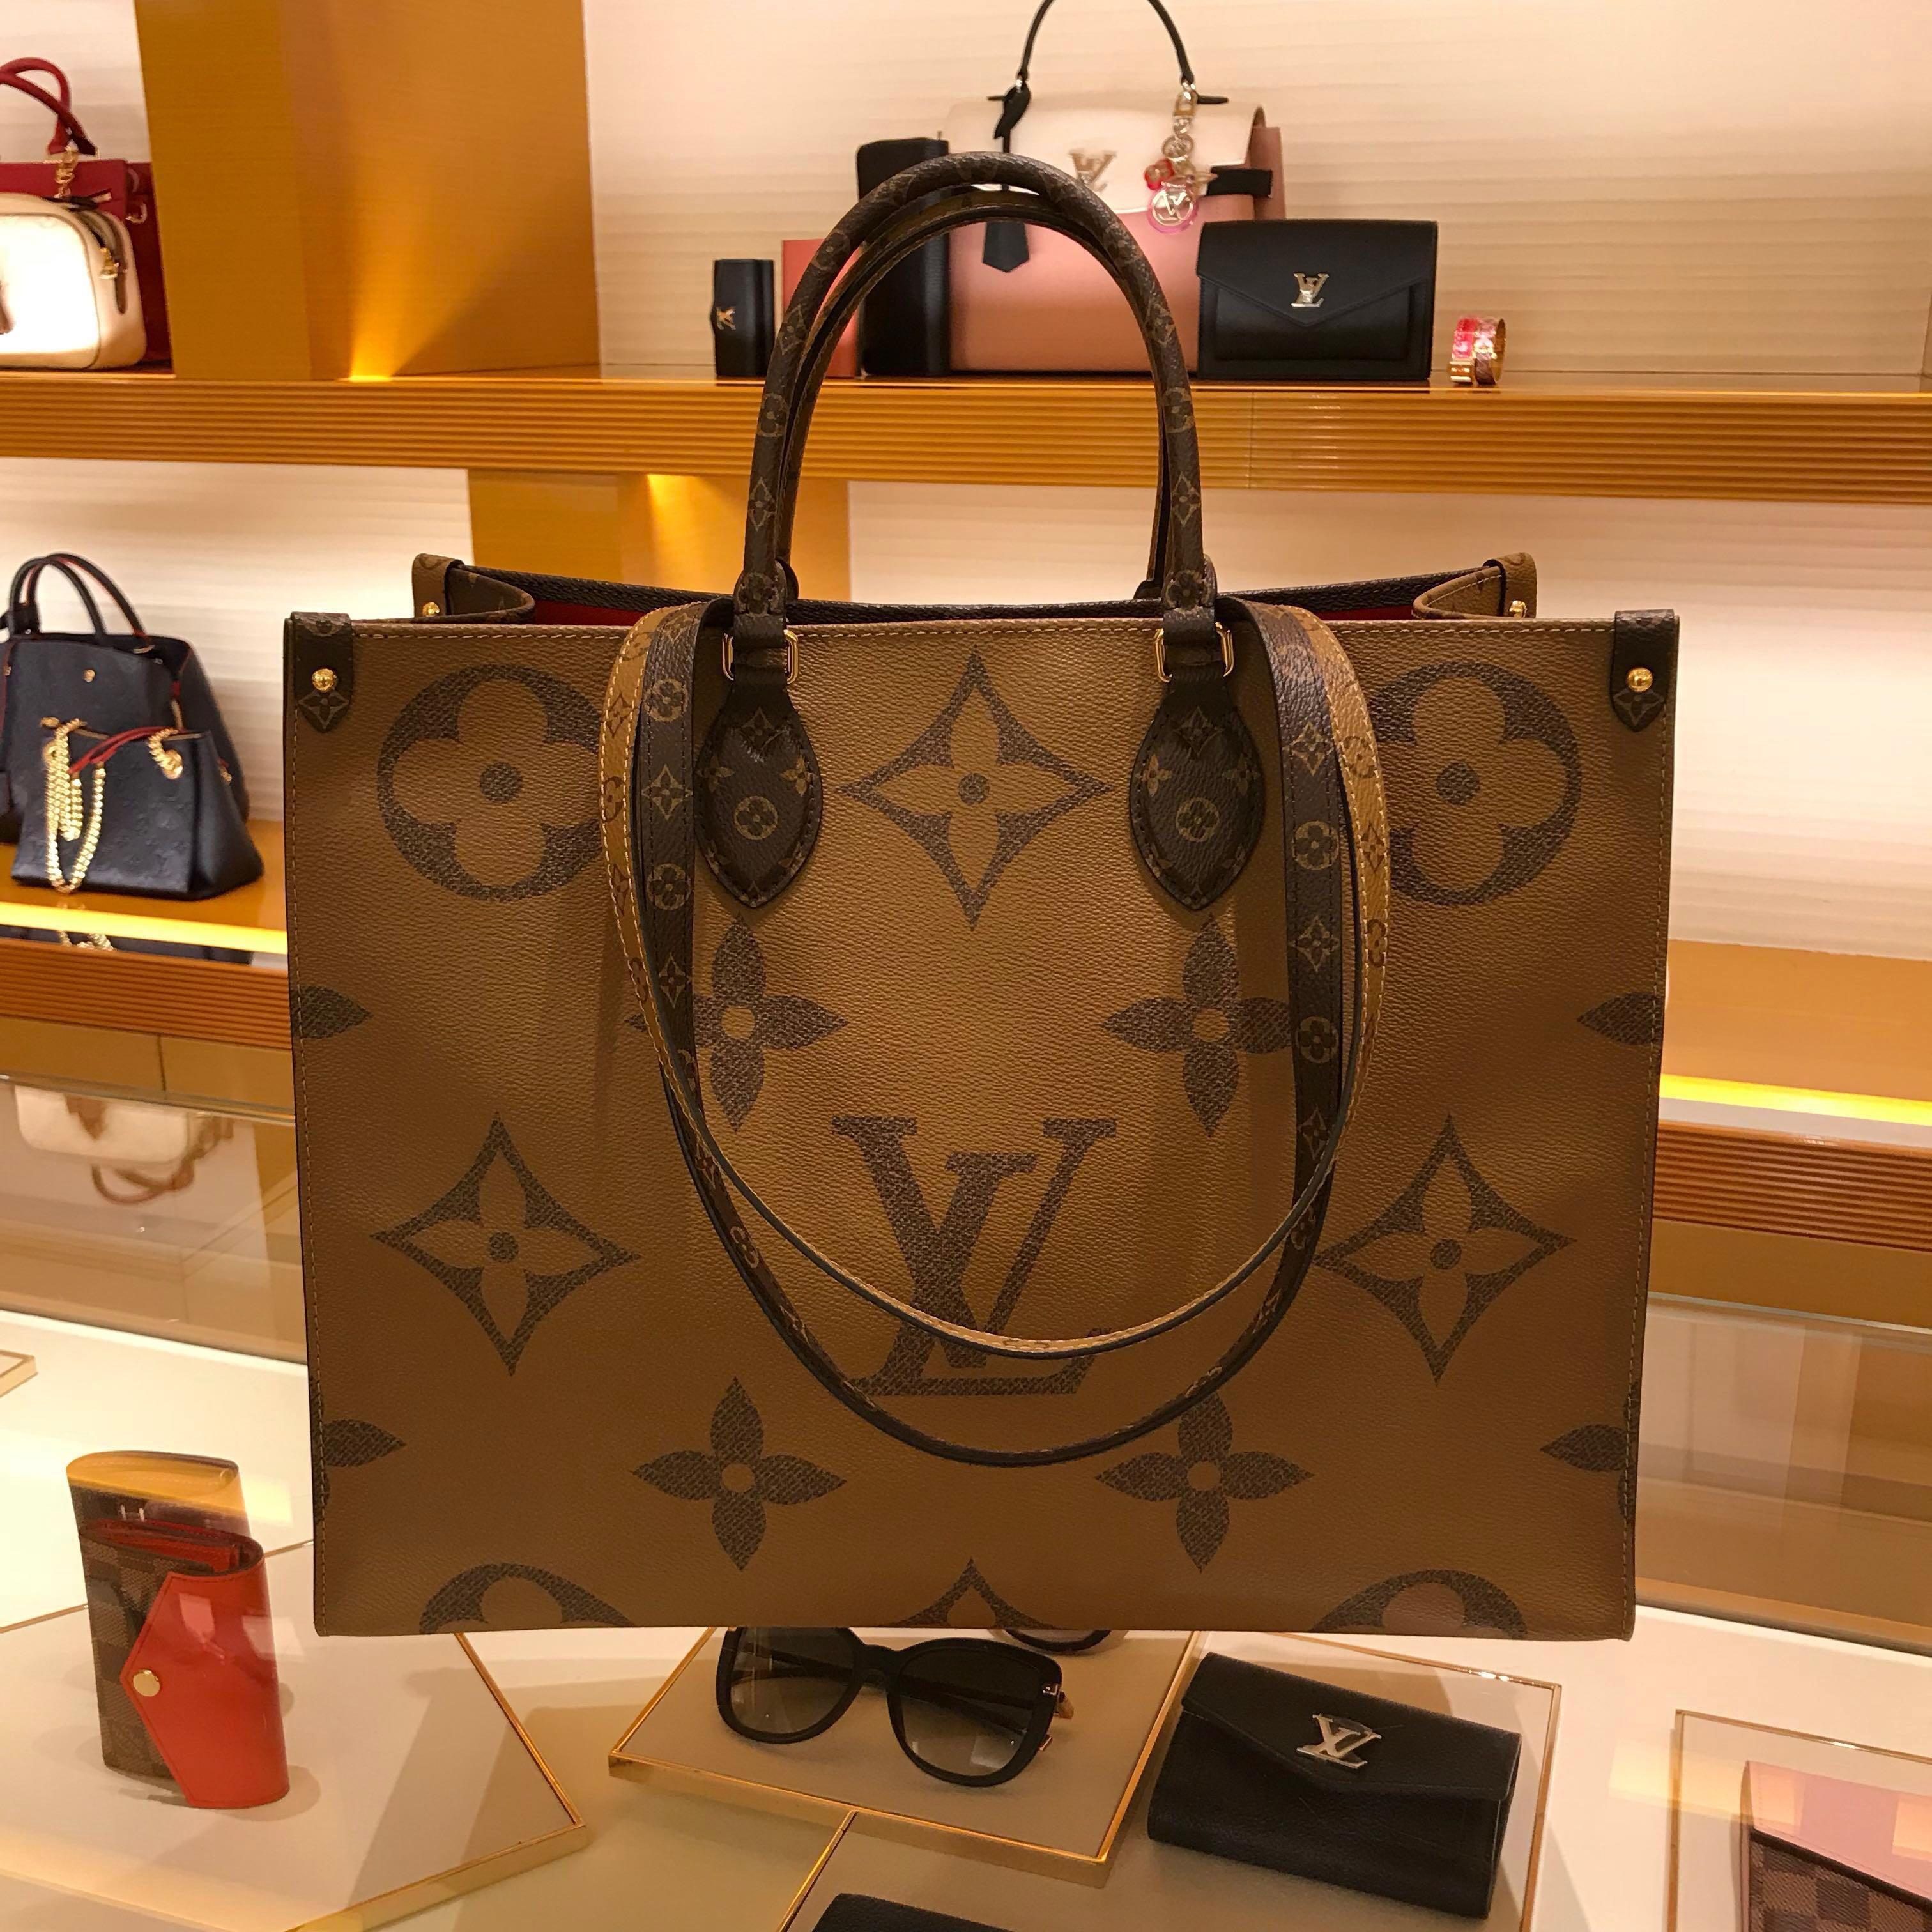 Louis Vuitton On The Go Tote Review | NAR Media Kit